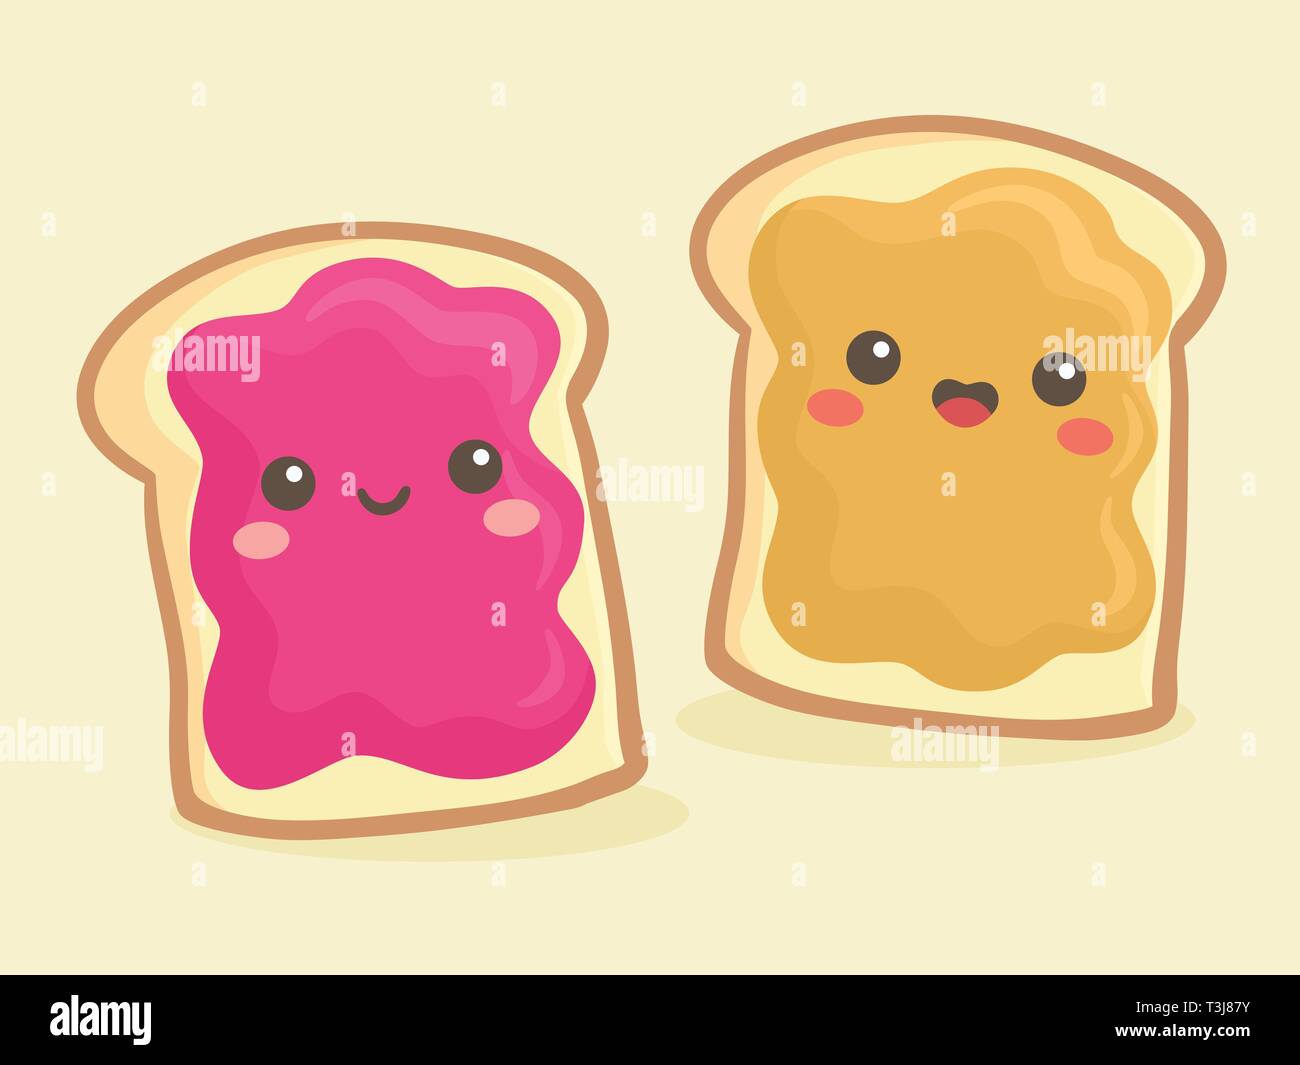 Cute Peanut Butter and Jelly Jam Loaf Bread Sandwich Vector Illustration Cartoon Smile Stock Vector